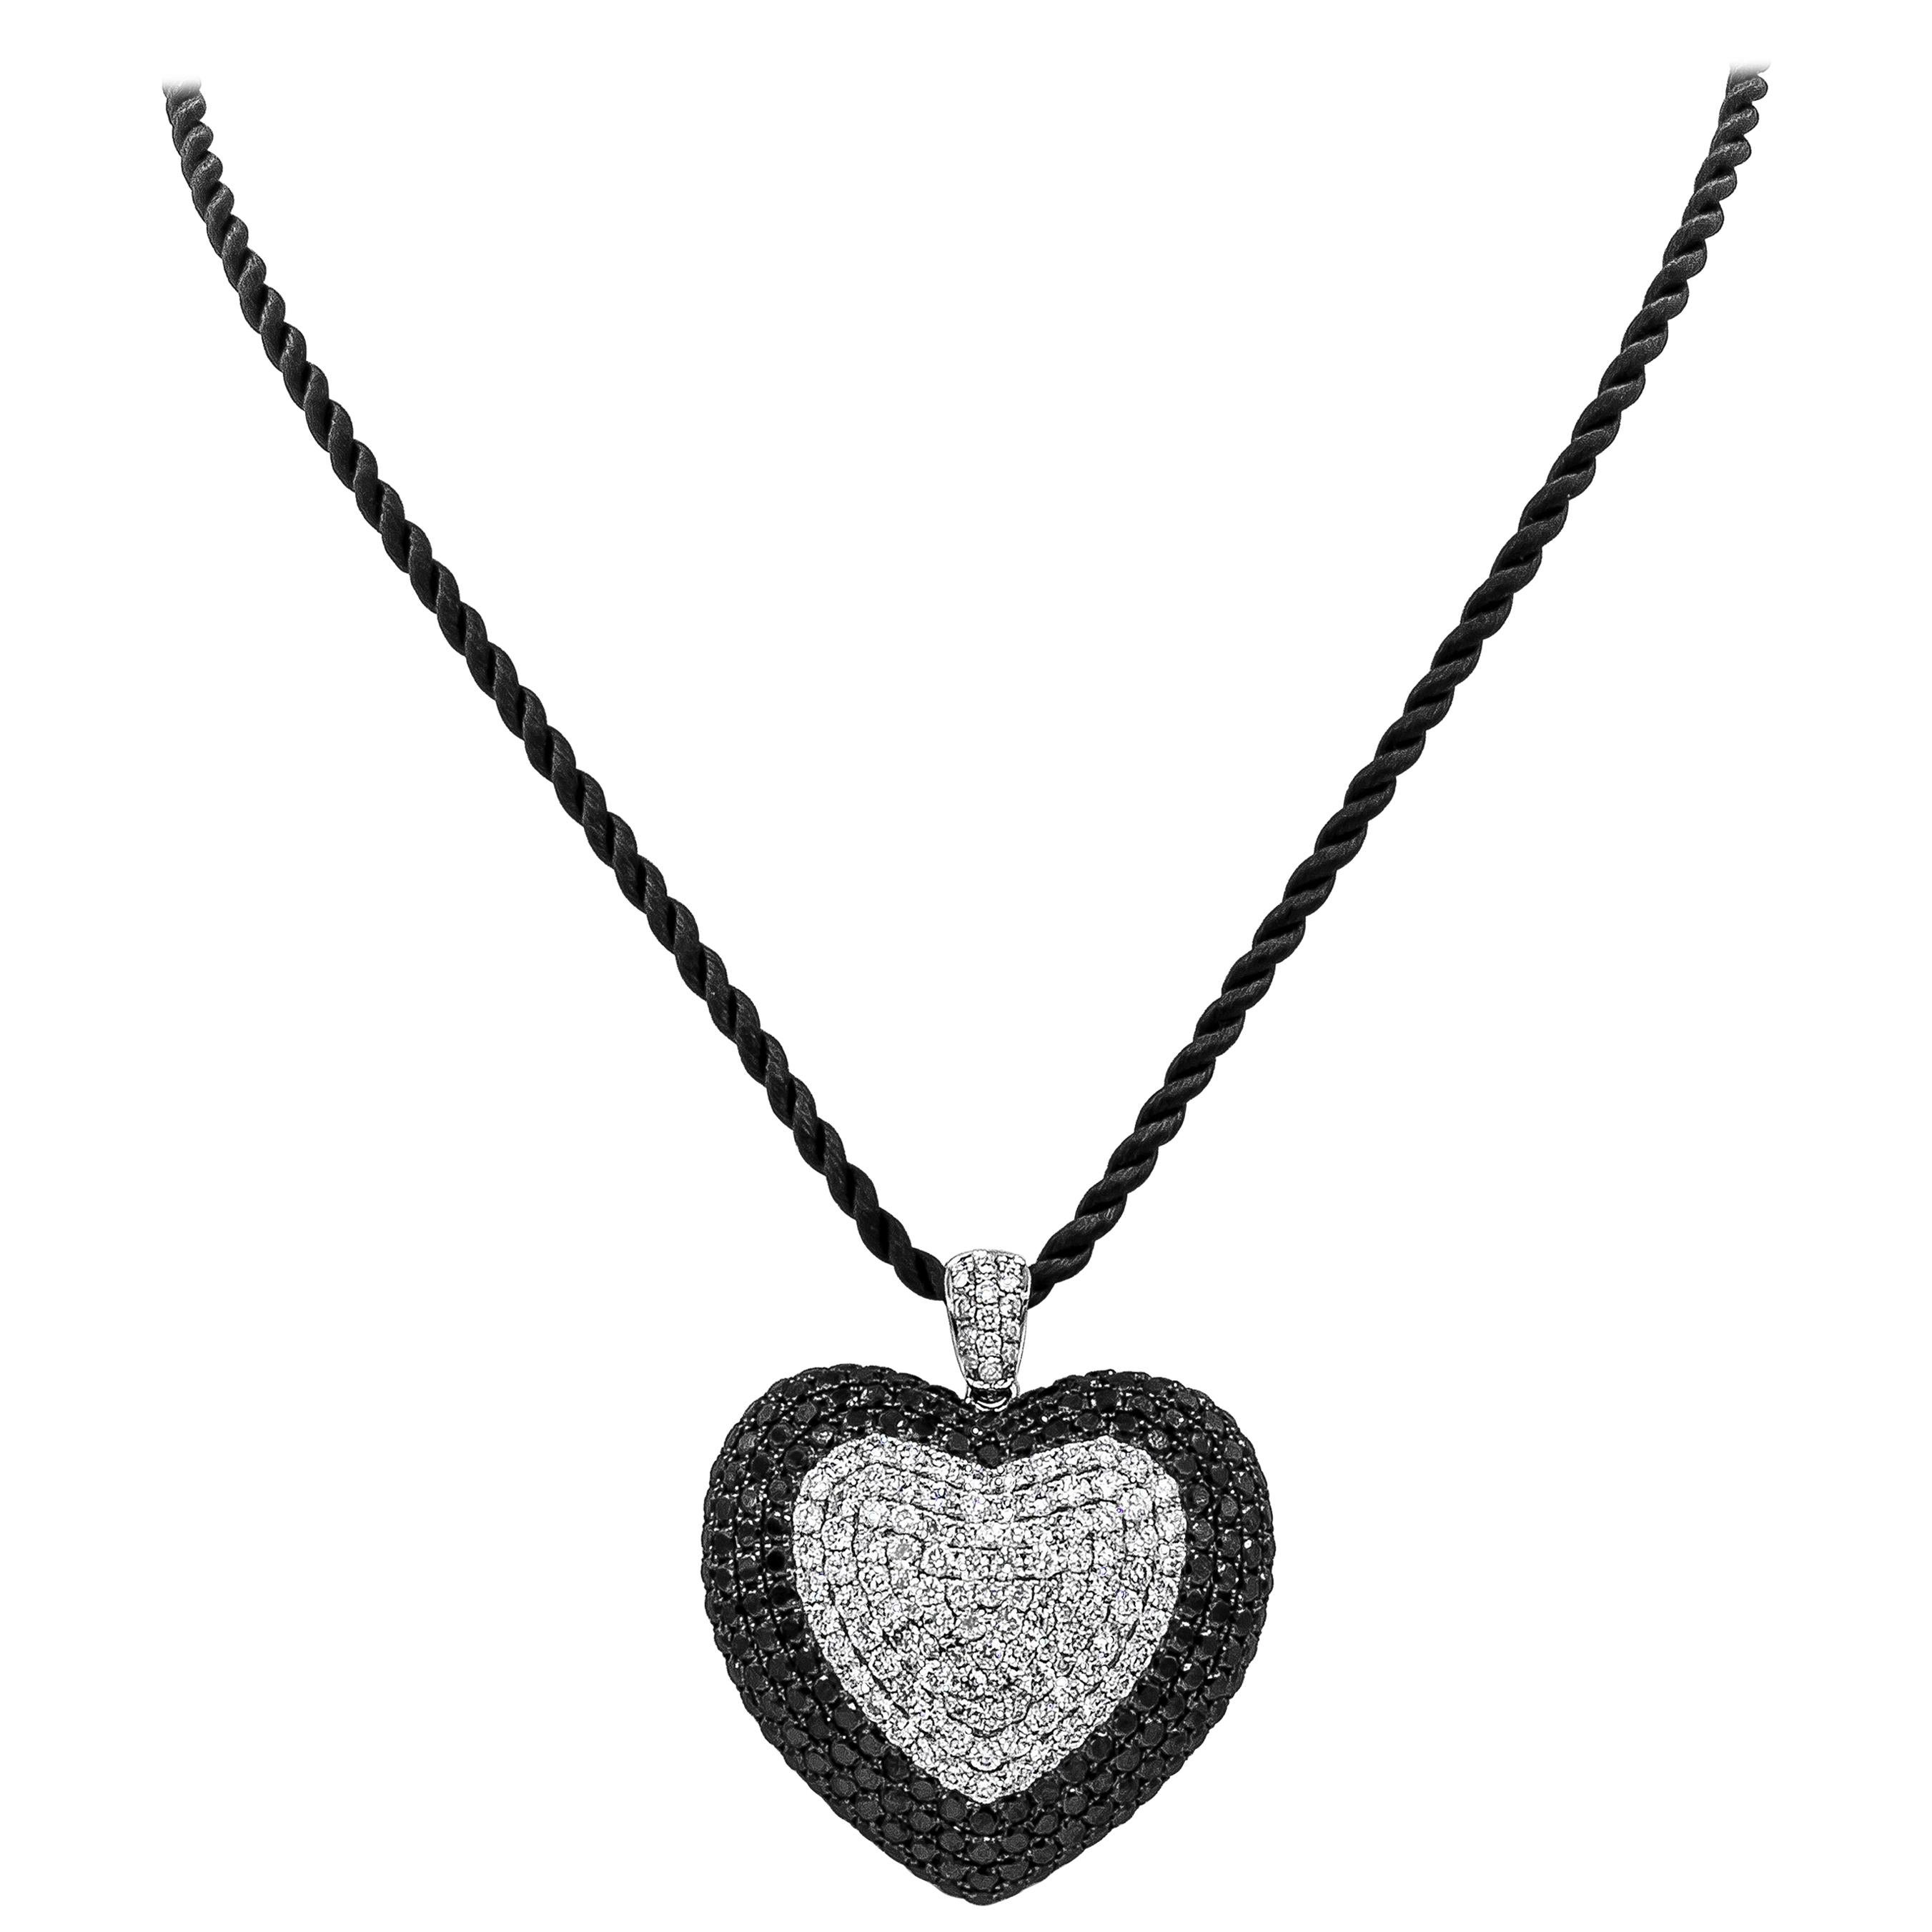 12.40 Carat Micro-Pave Black and White Diamond Heart Pendant Necklace For Sale